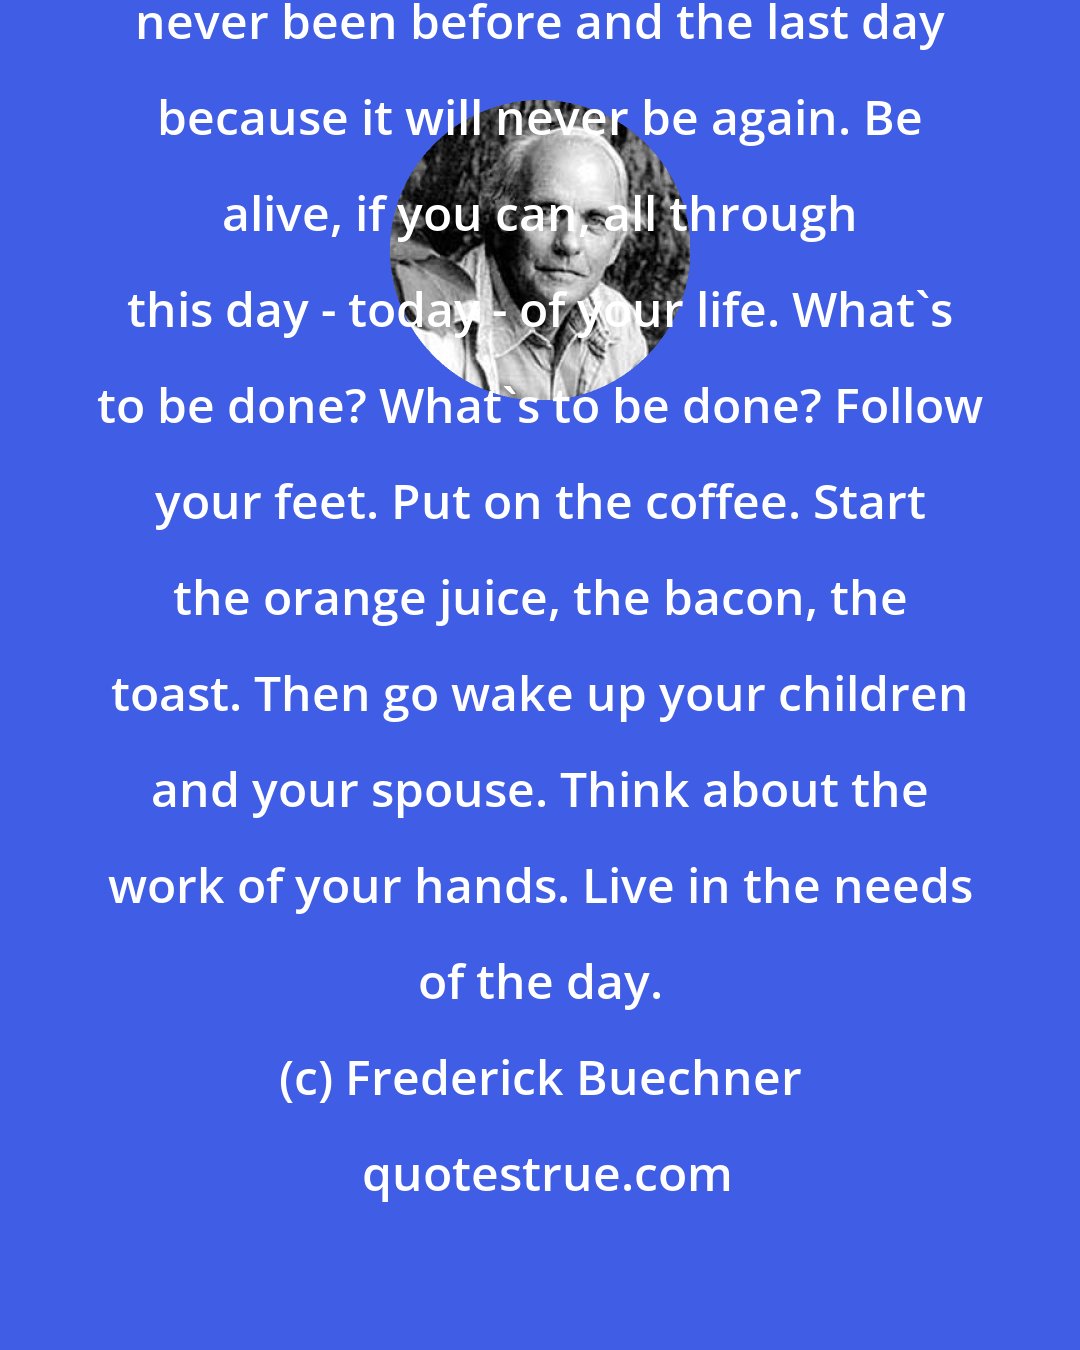 Frederick Buechner: It is the first day because it has never been before and the last day because it will never be again. Be alive, if you can, all through this day - today - of your life. What's to be done? What's to be done? Follow your feet. Put on the coffee. Start the orange juice, the bacon, the toast. Then go wake up your children and your spouse. Think about the work of your hands. Live in the needs of the day.